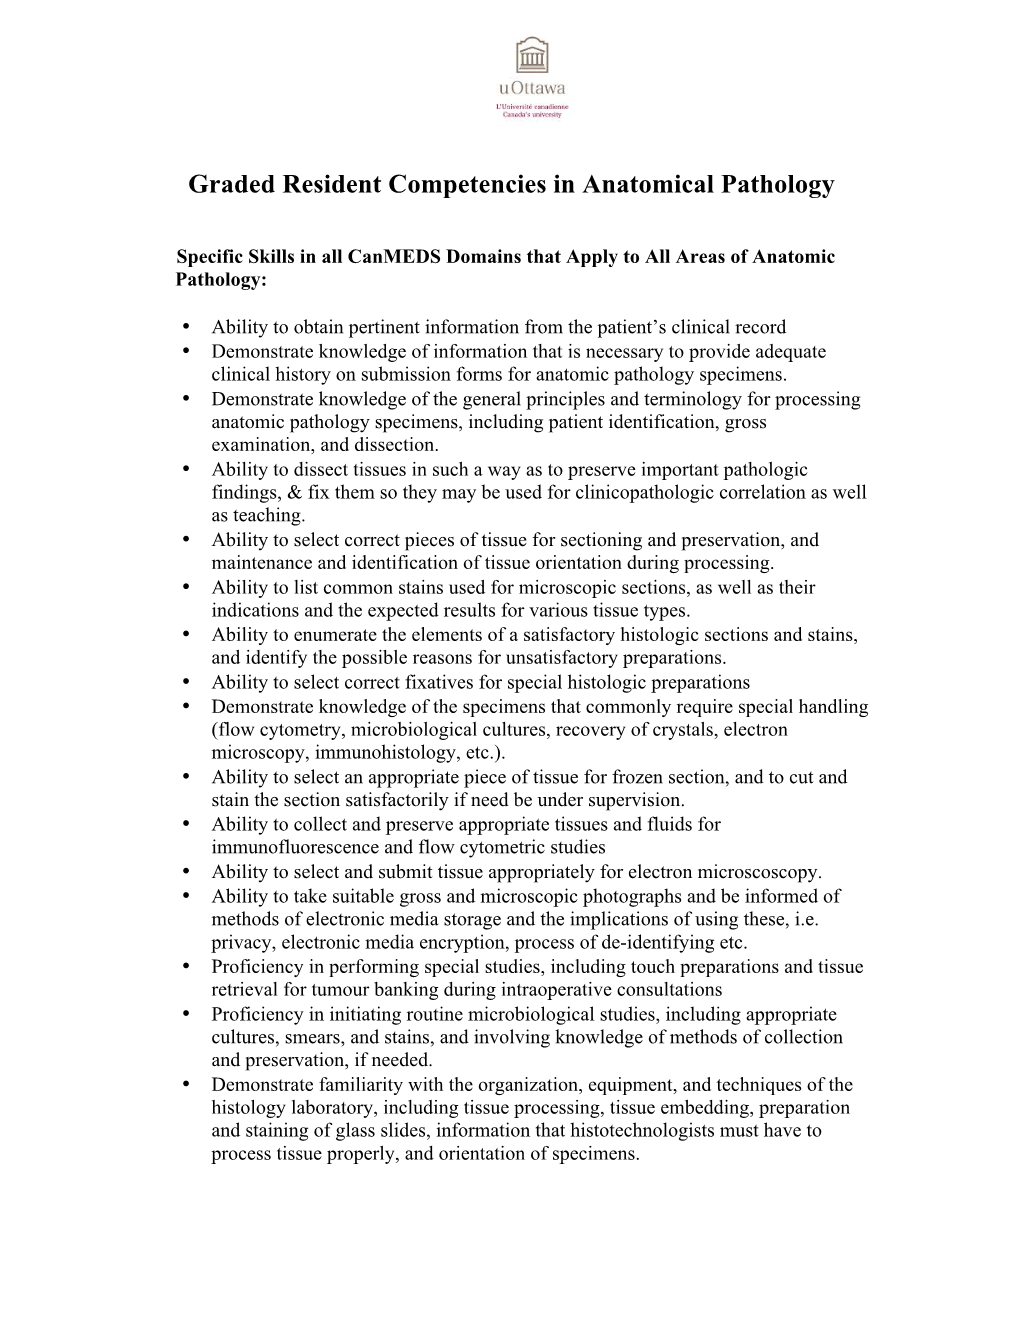 Graded Resident Competencies in Anatomical Pathology